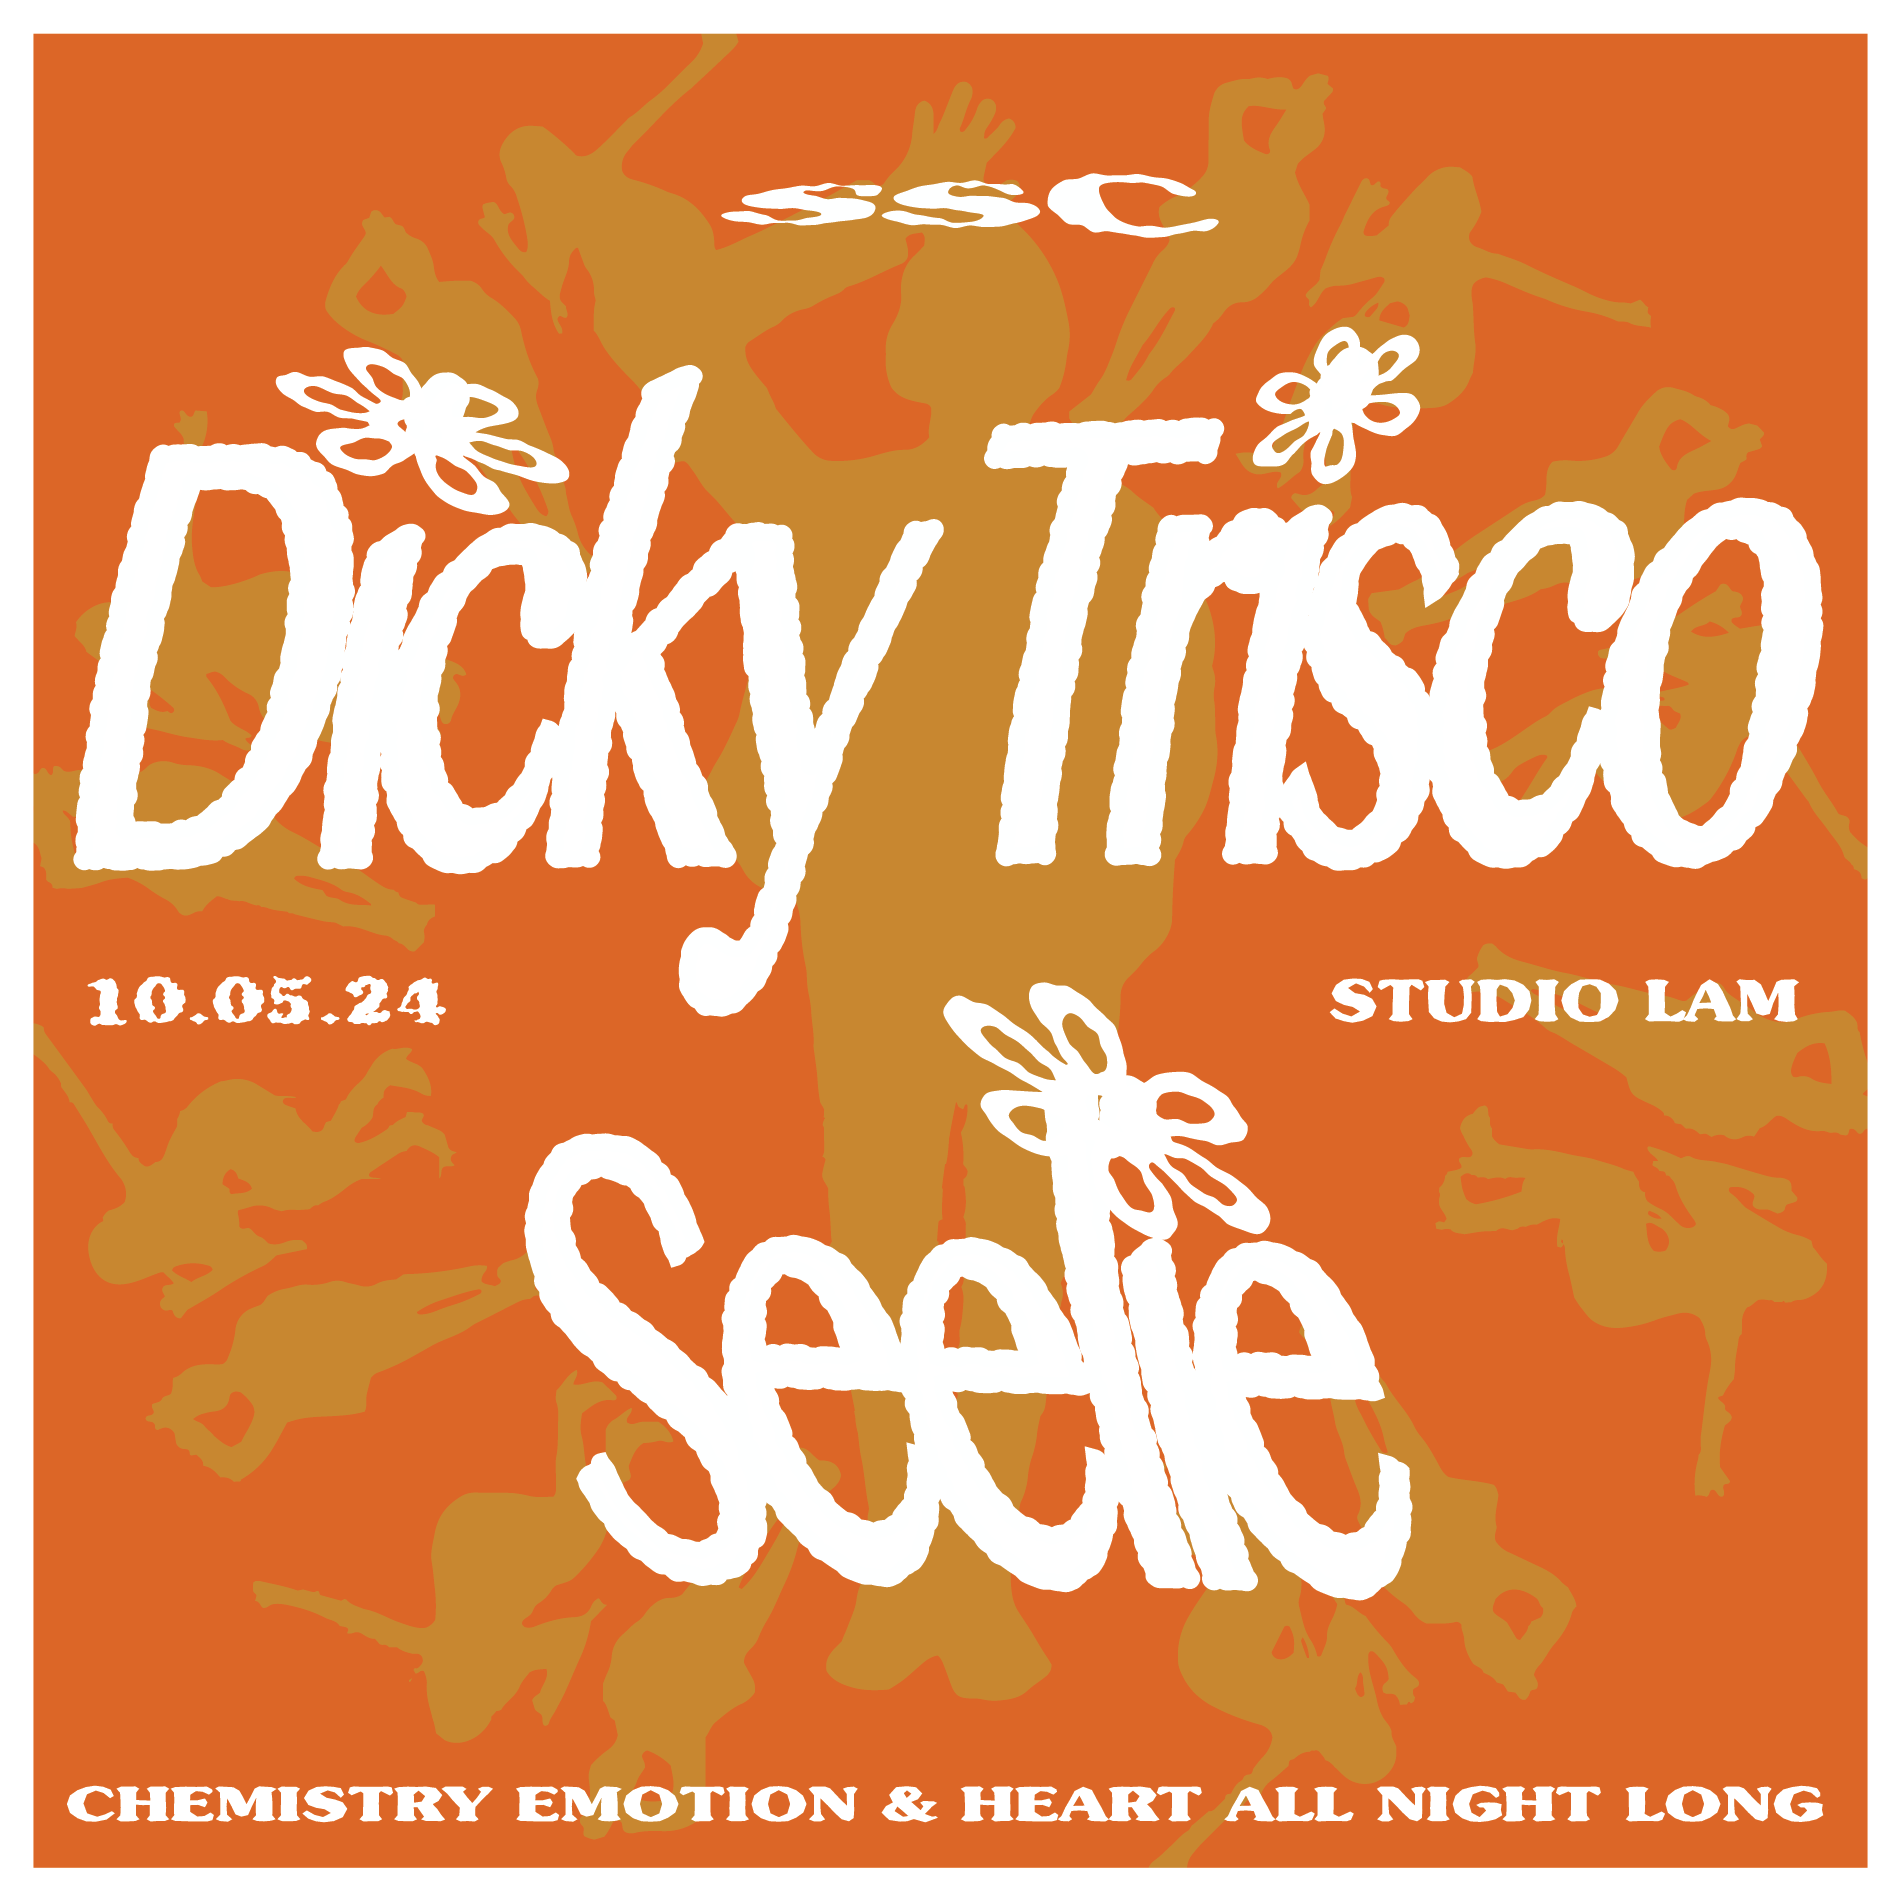 Siam Soul Club with DICKY TRISCO - フライヤー表